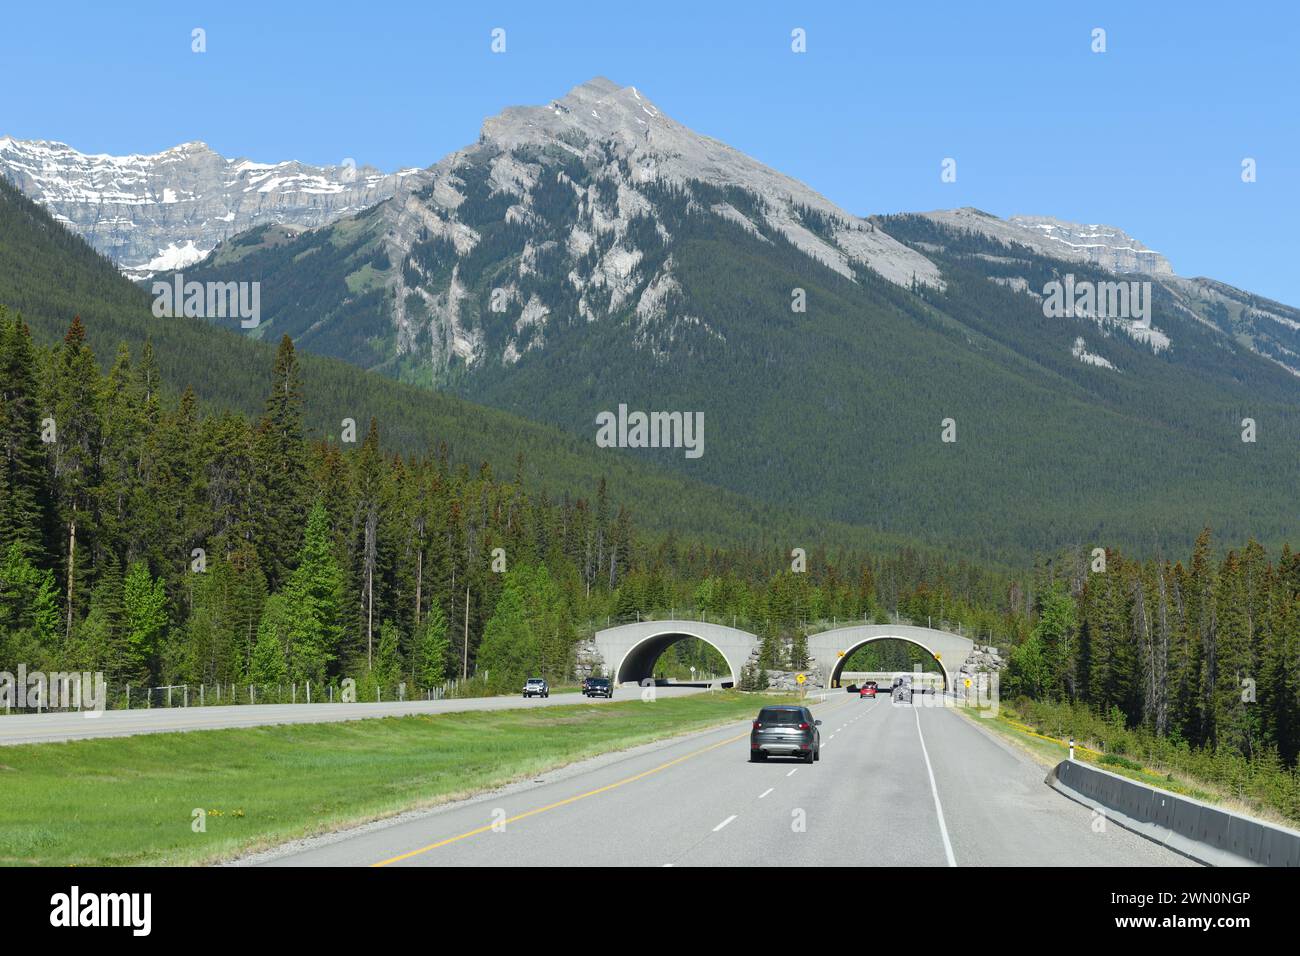 The Banff wildlife crossing spans the Trans Canada Highway providing a safe route for many animals Stock Photo